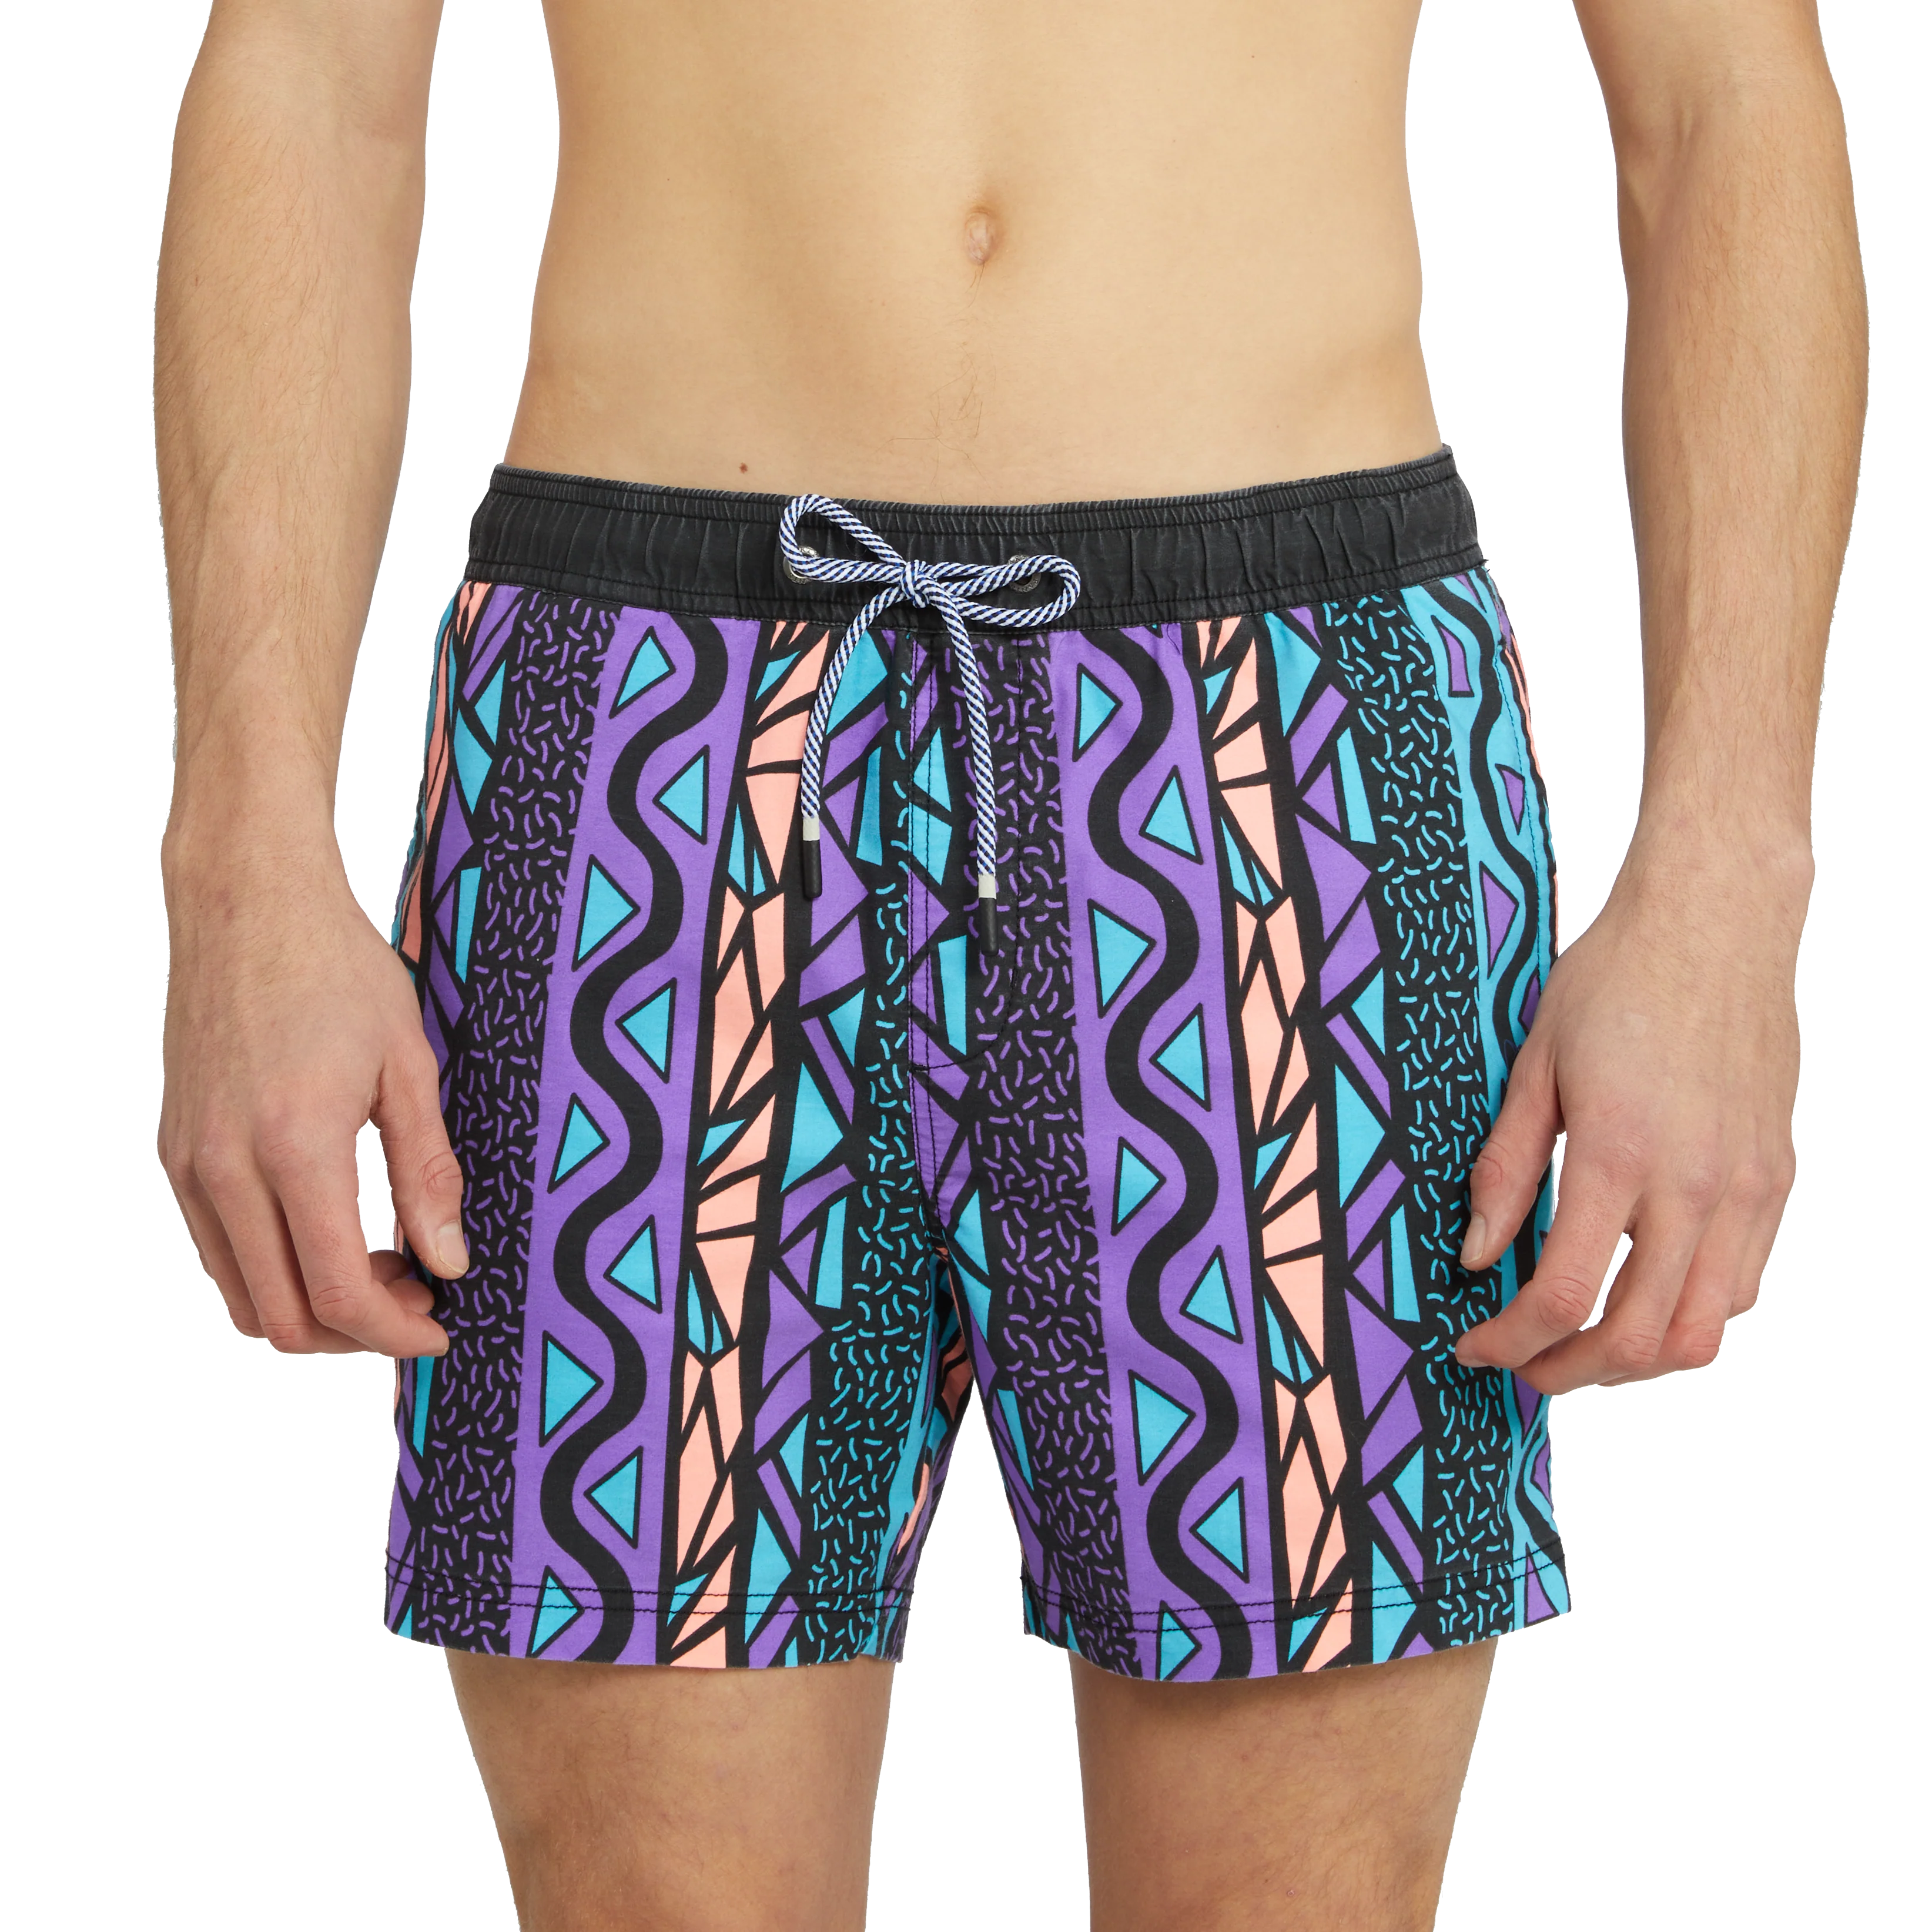 A front view of a guy wearing the Maui Wowie Party Starter Short